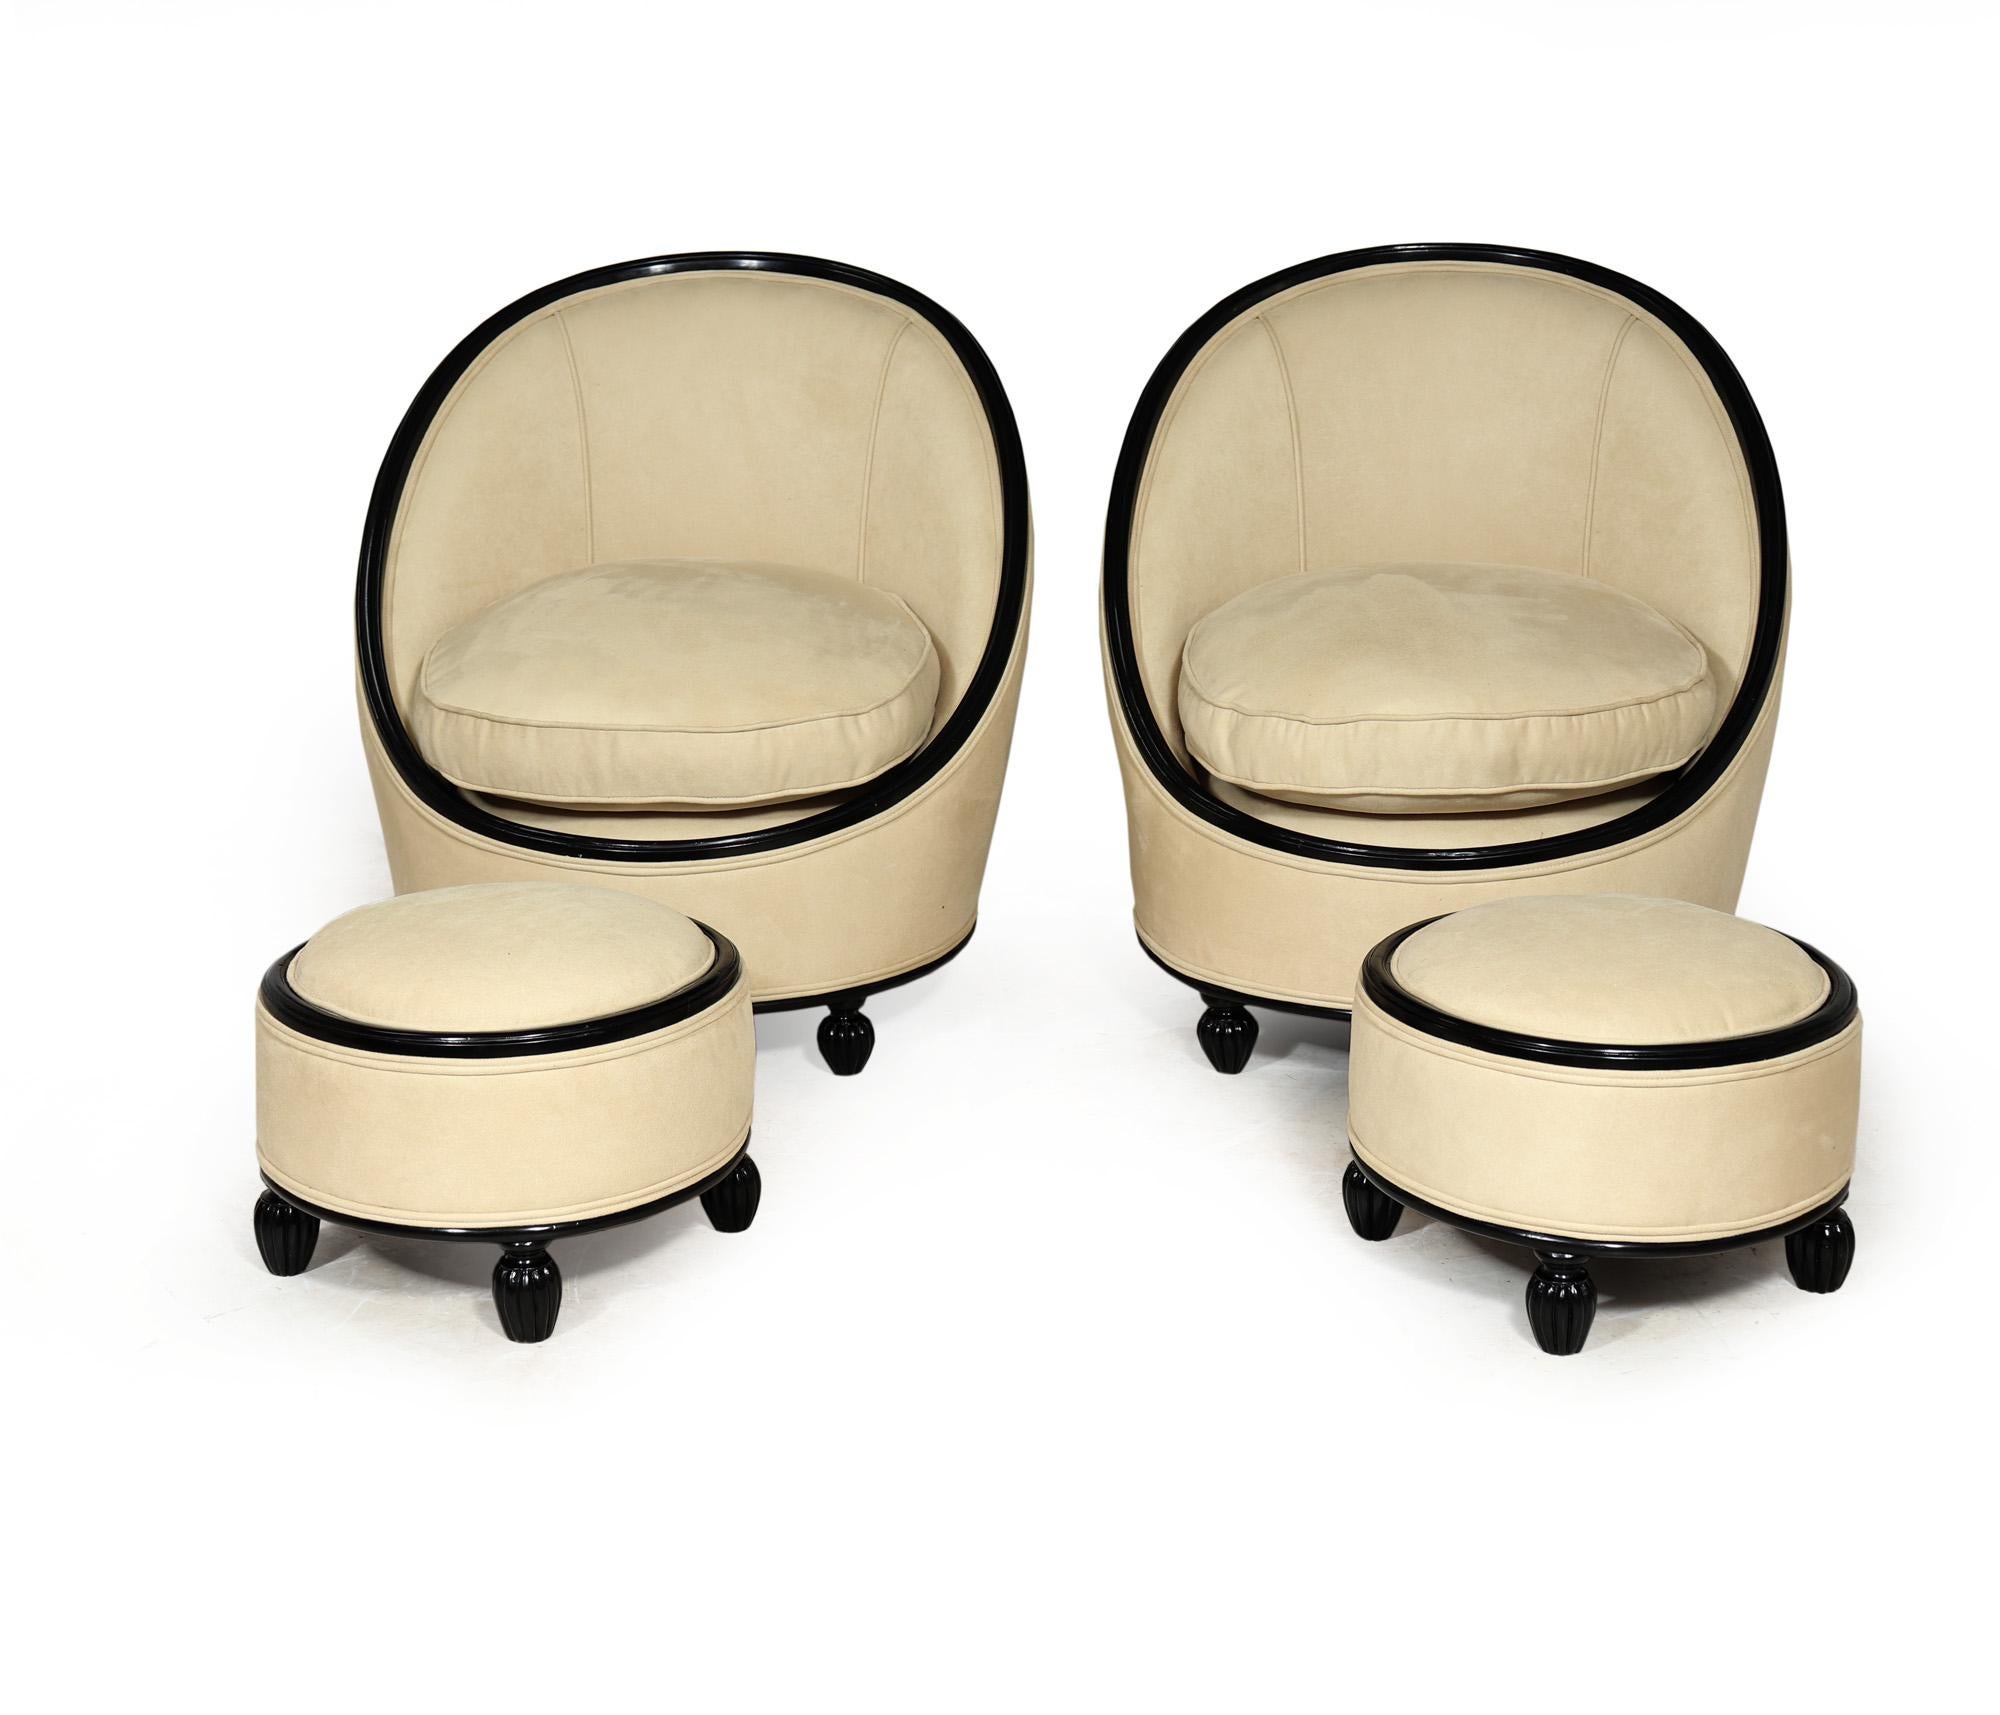 FRENCH ART DECO SALON CHAIRS 
These exquisite French Art Deco Salon Chairs and stools are reminiscent of the iconic style of Ruhlman. With their elegant hoop-like rail and reeded tulip feet, they exude sophistication. The chair frames, made of